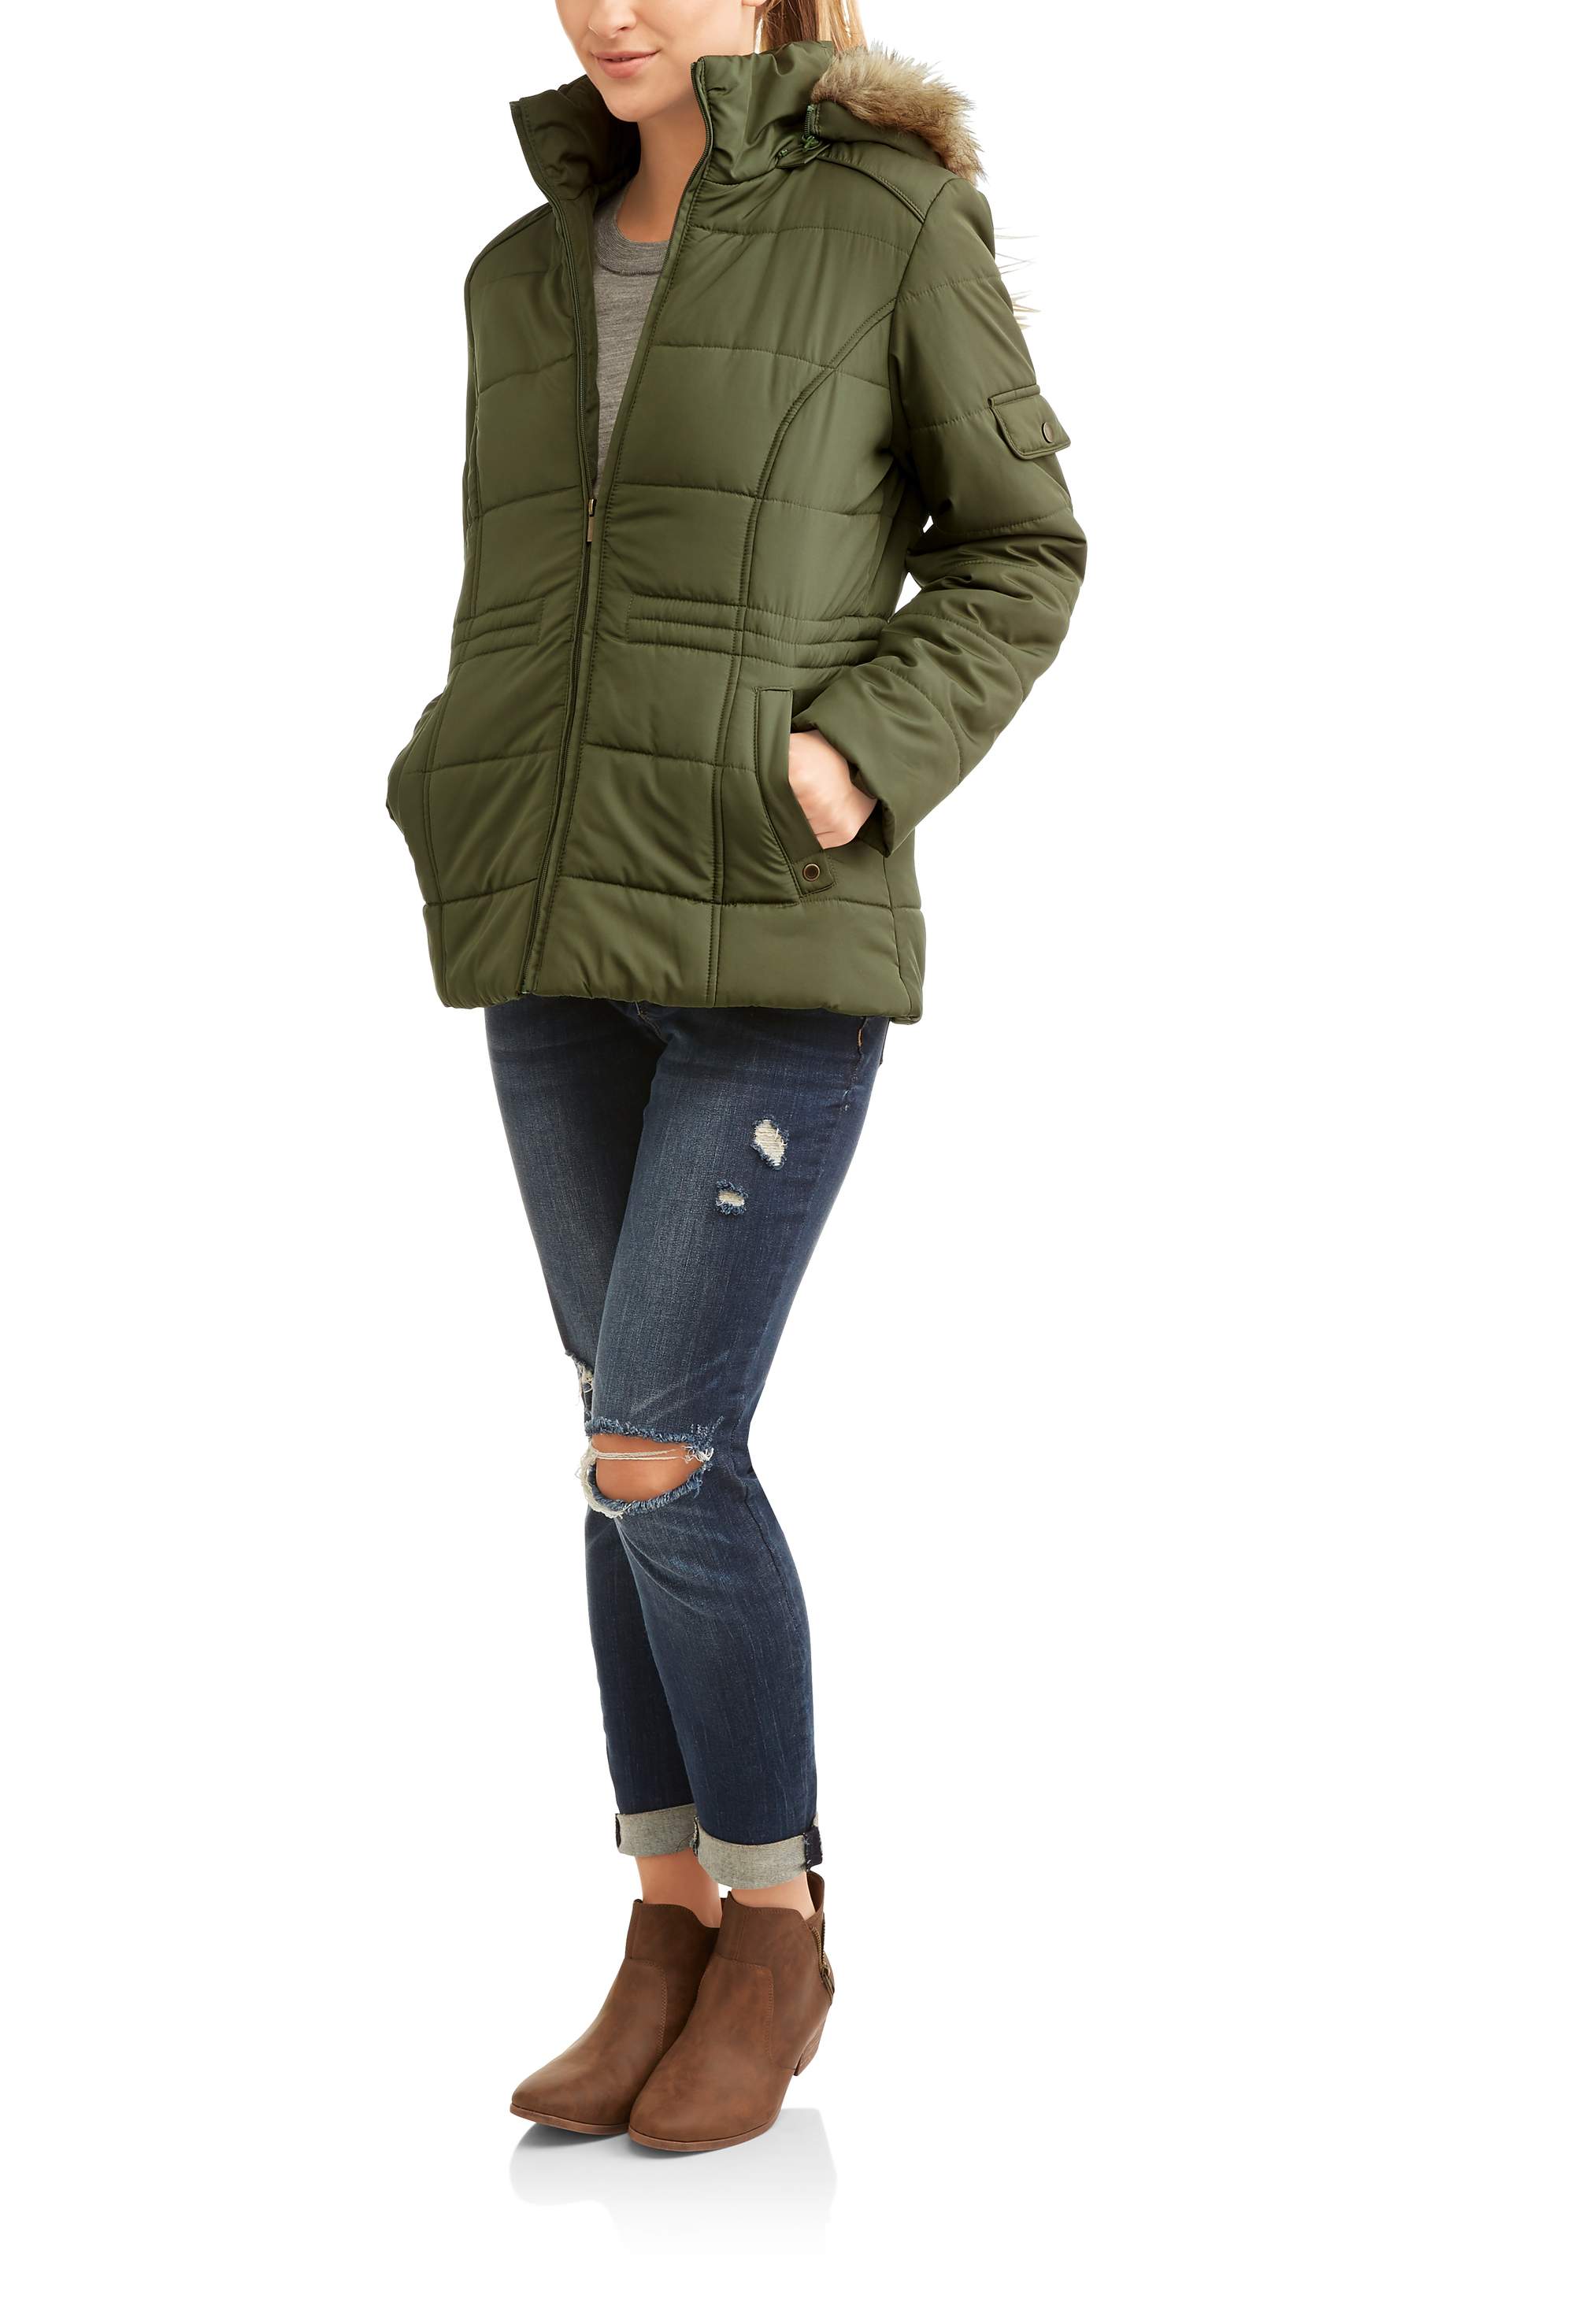 Faded Glory Missy Quilted Puffer Jacket - image 1 of 4